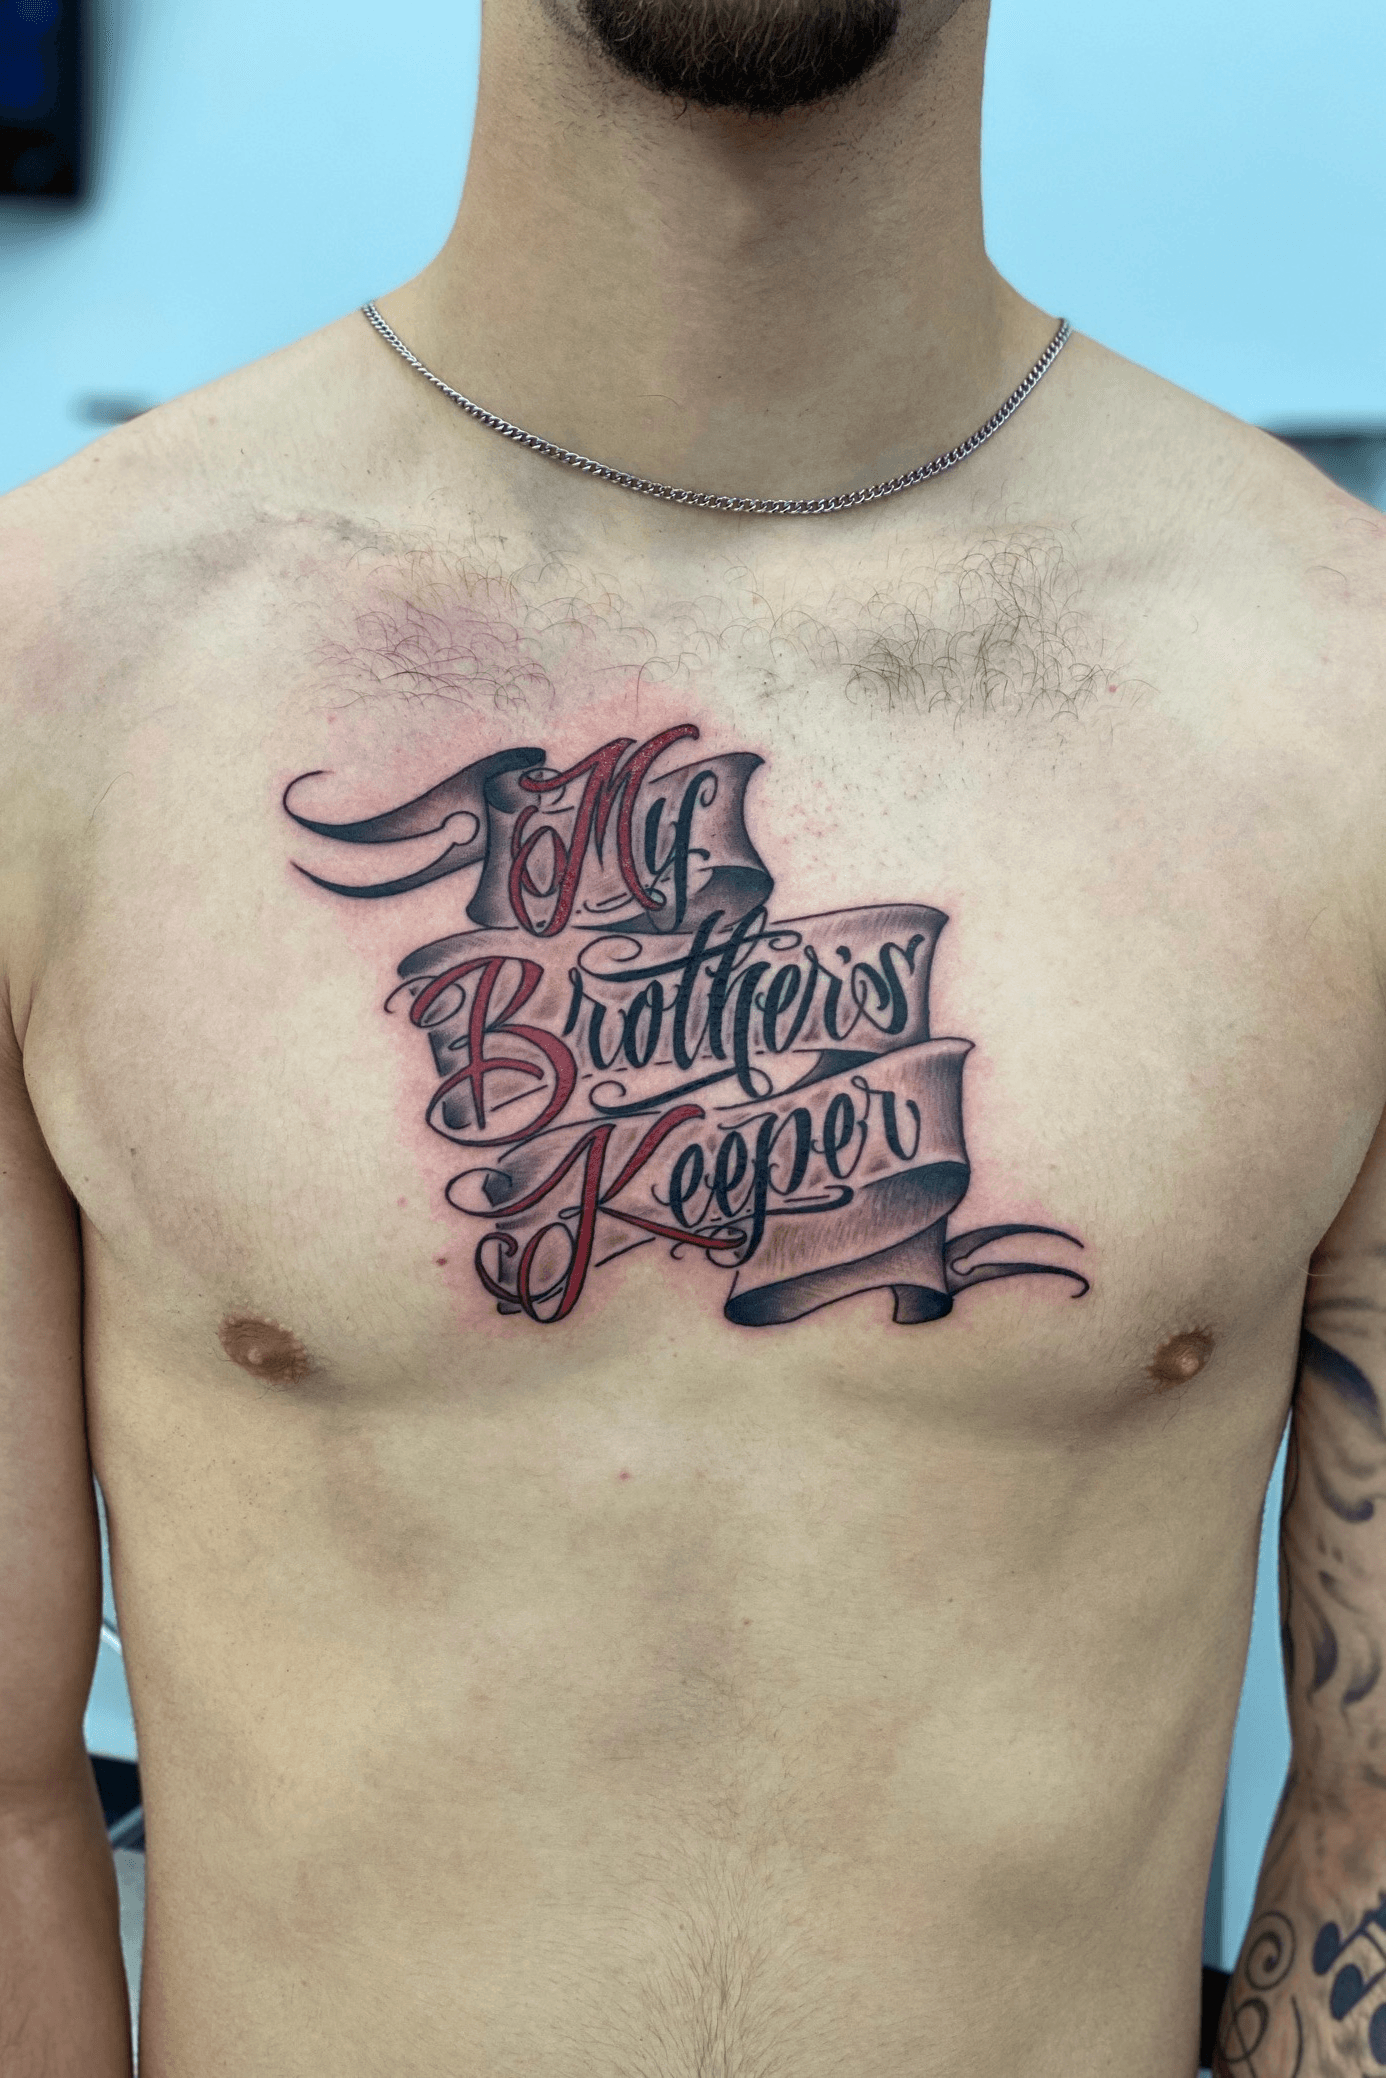 Brothers Keeper Tattoo  BME Tattoo Piercing and Body Modification  NewsBME Tattoo Piercing and Body Modification News